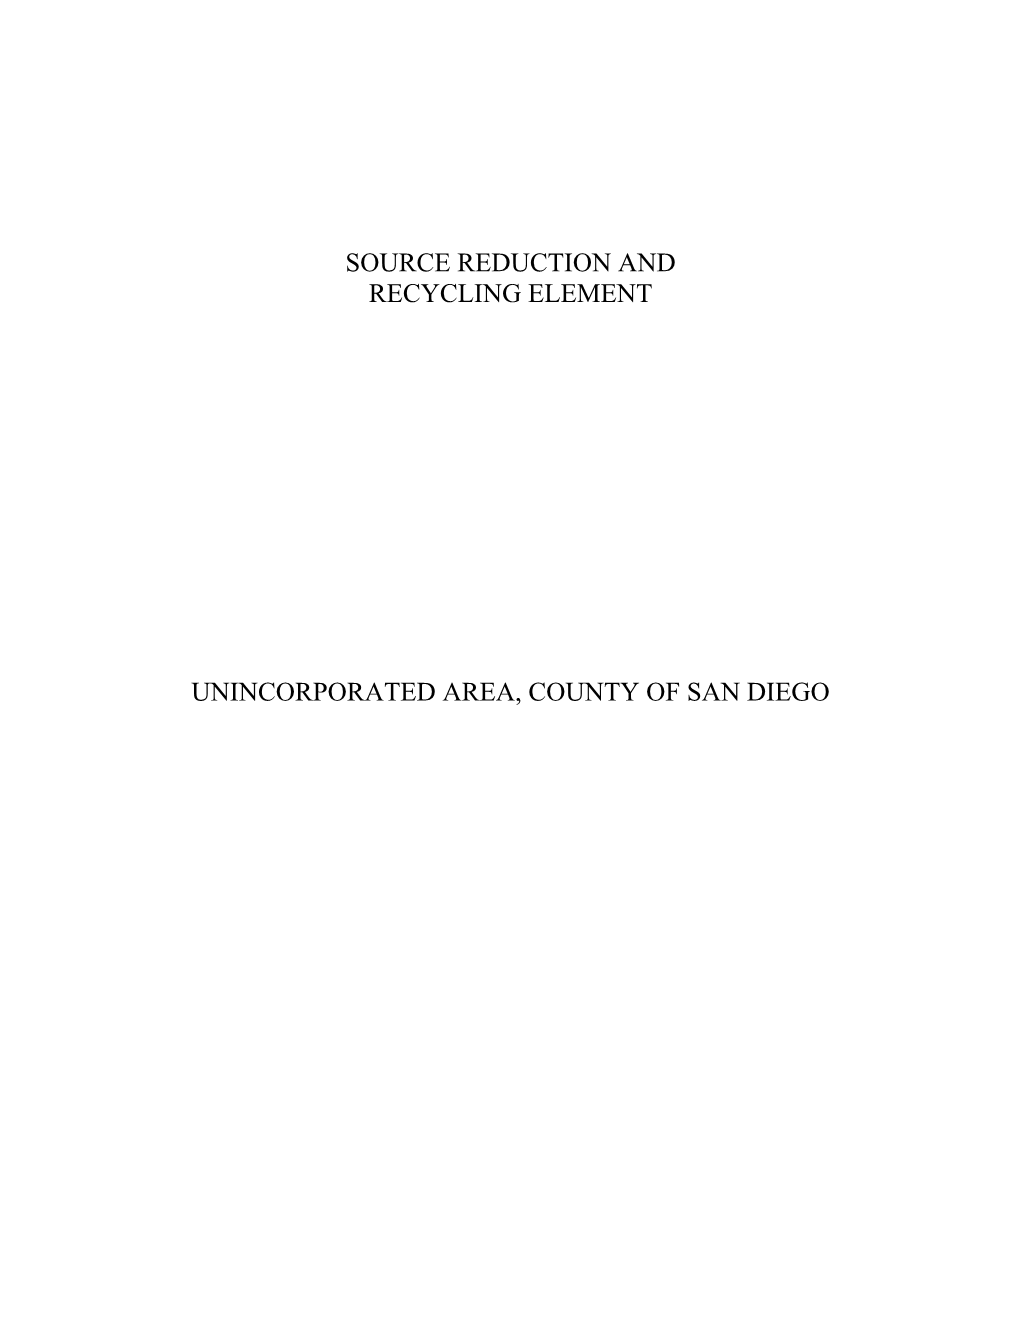 1990 Unincorporated County Source Reduction and Recycling Element